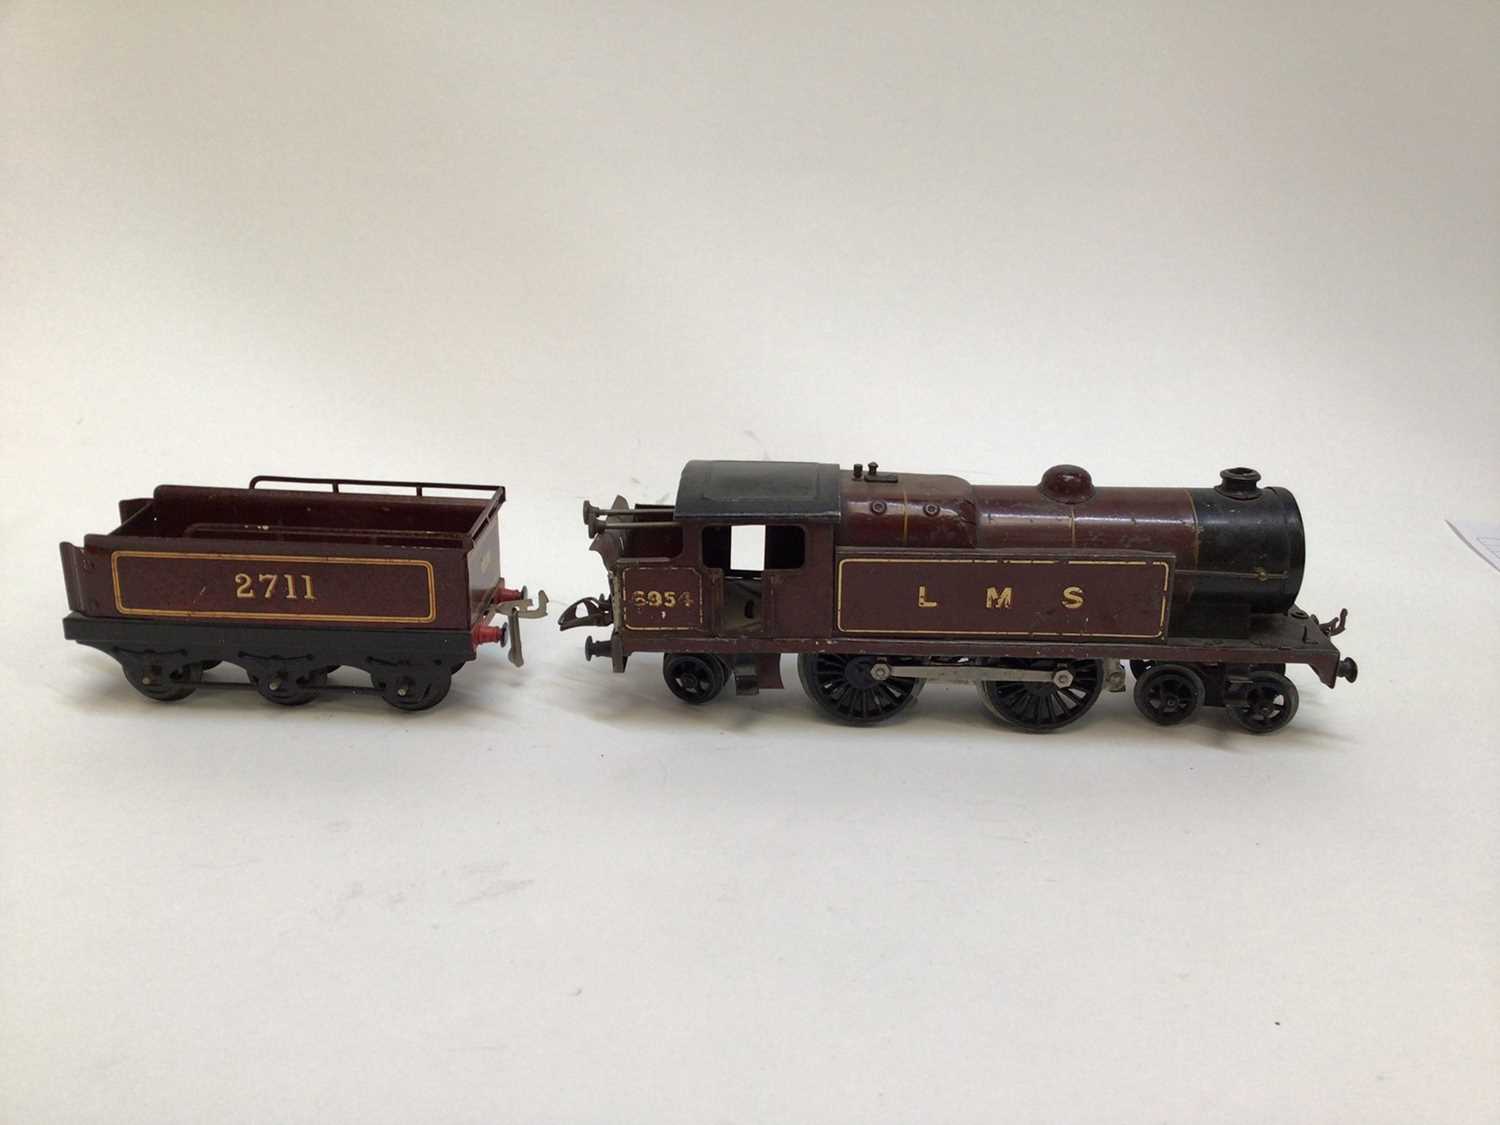 Lot 24 - Railway O Gauge selection of unboxed locomotives including LMS 4-4-0, 0-4-0,No 2270, 0-4-0 No 4429 plus one tender No 2711